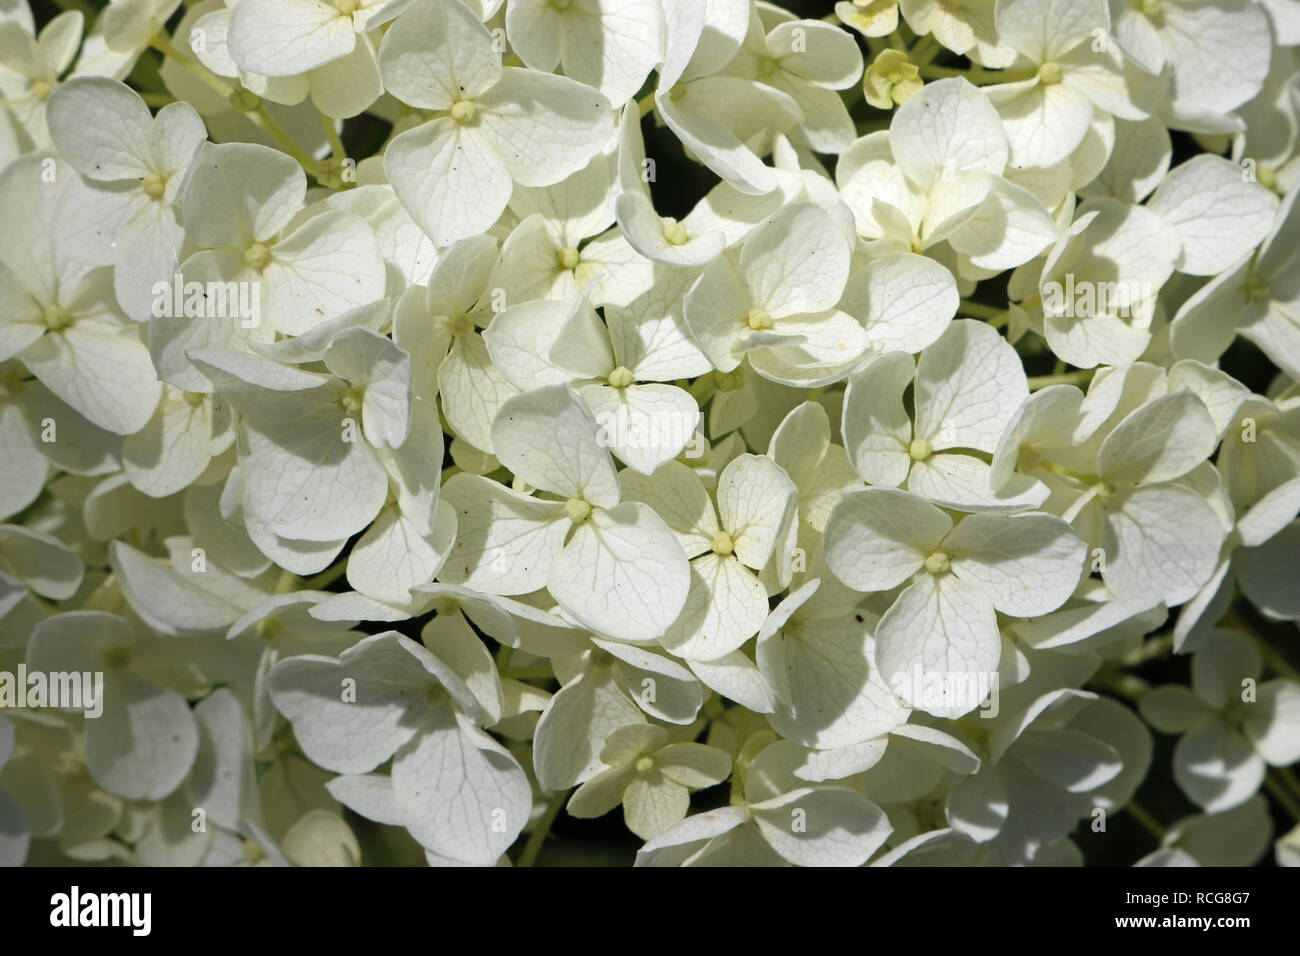 White mophead Hydrangea flowers with delicate veins in the petals and ...